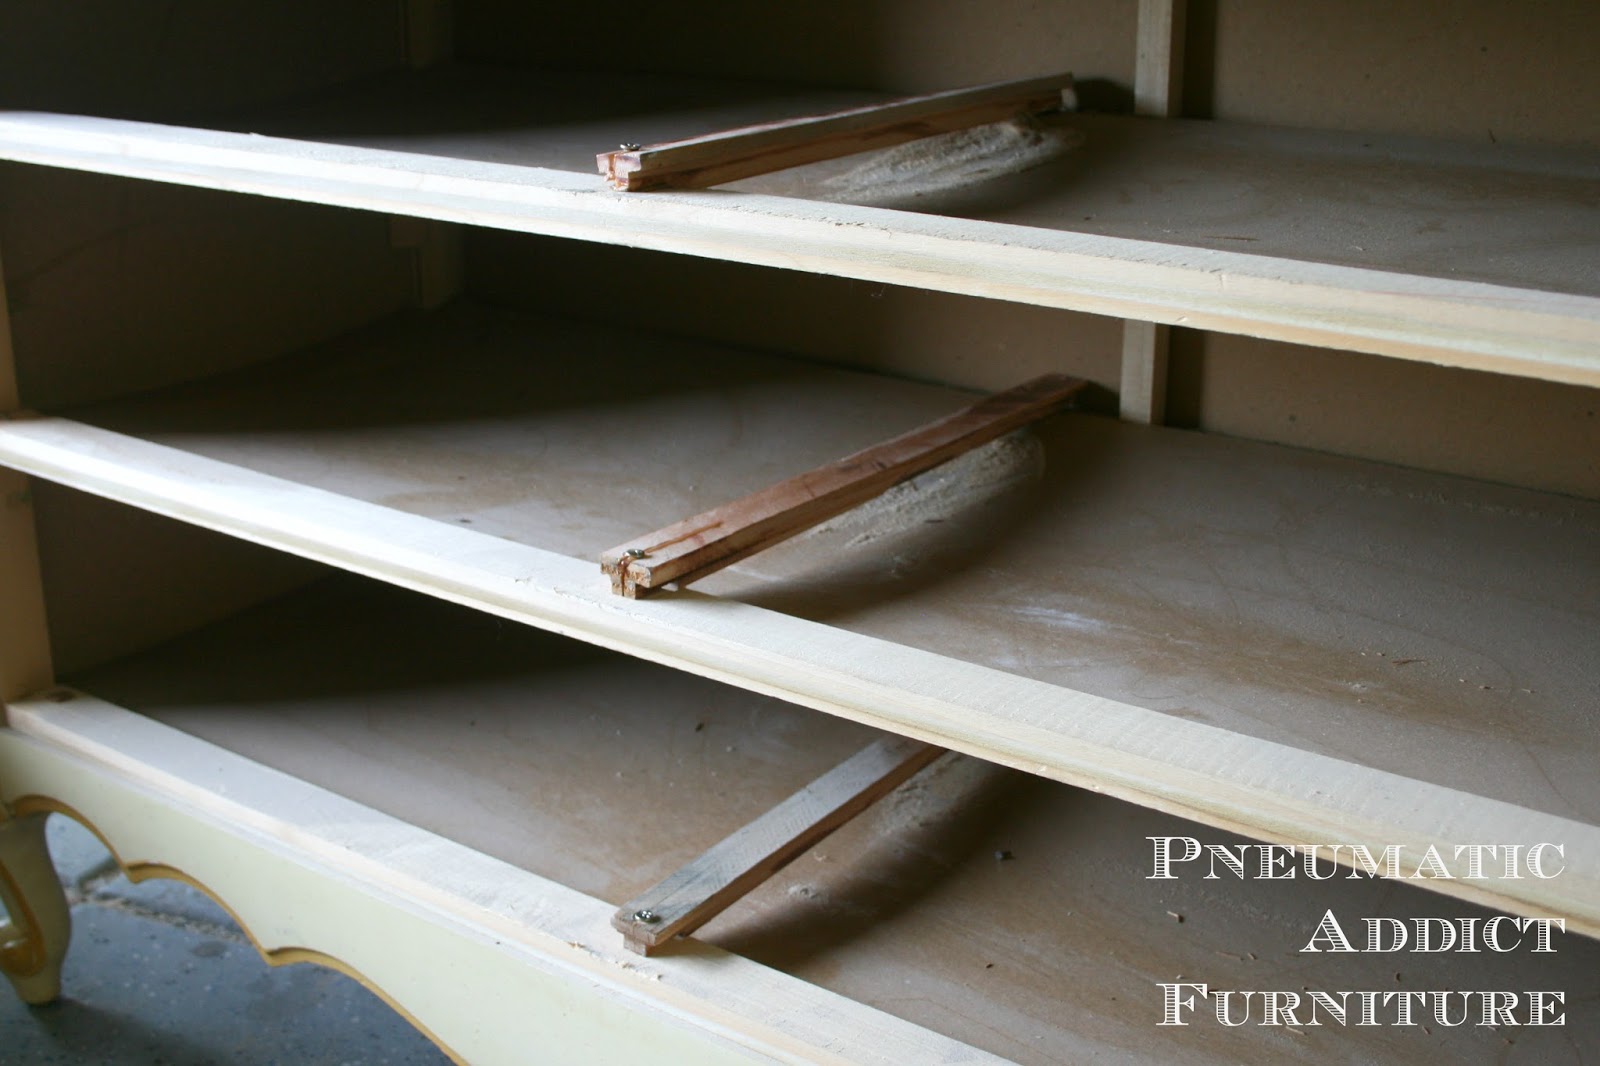 How To Build Your Own Drawer Slides, How To Repair Dresser Drawer Slides